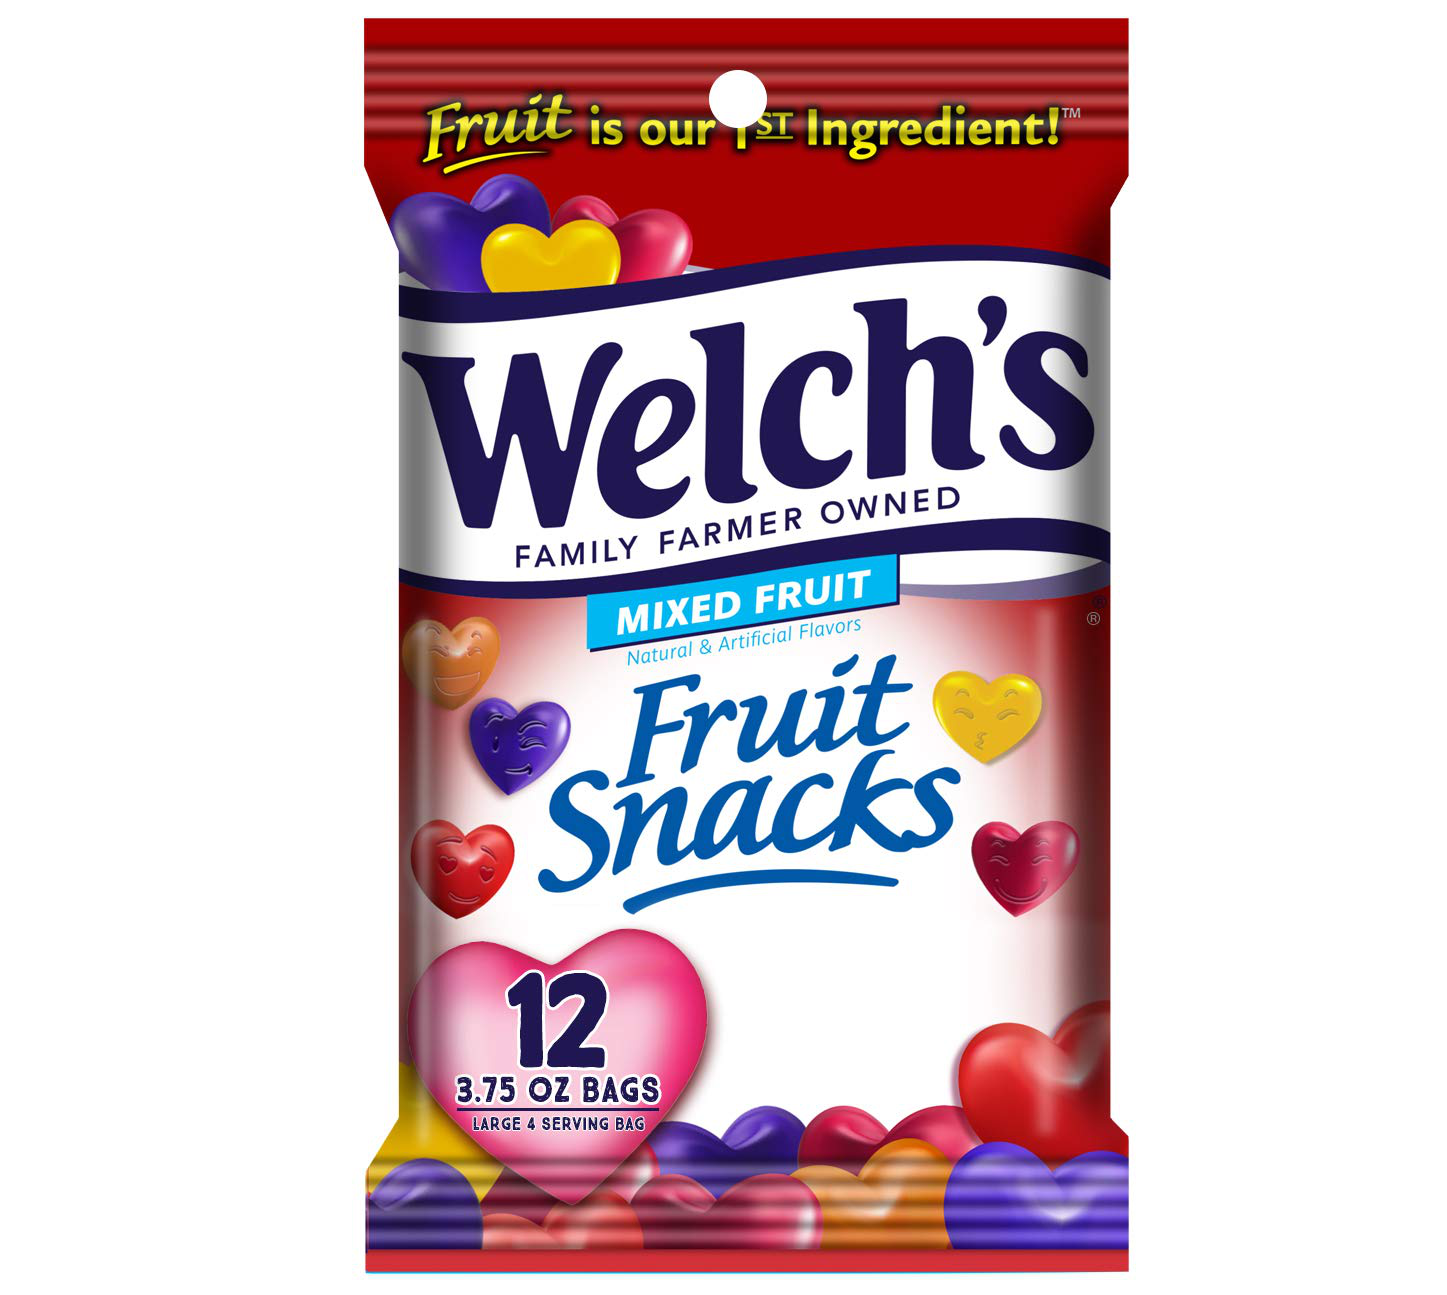 Welch's Fruit Snacks, Mixed Fruit, Gluten Free, Bulk Pack, 0.9 oz Individual Single Serve Bags (Pack of 40)